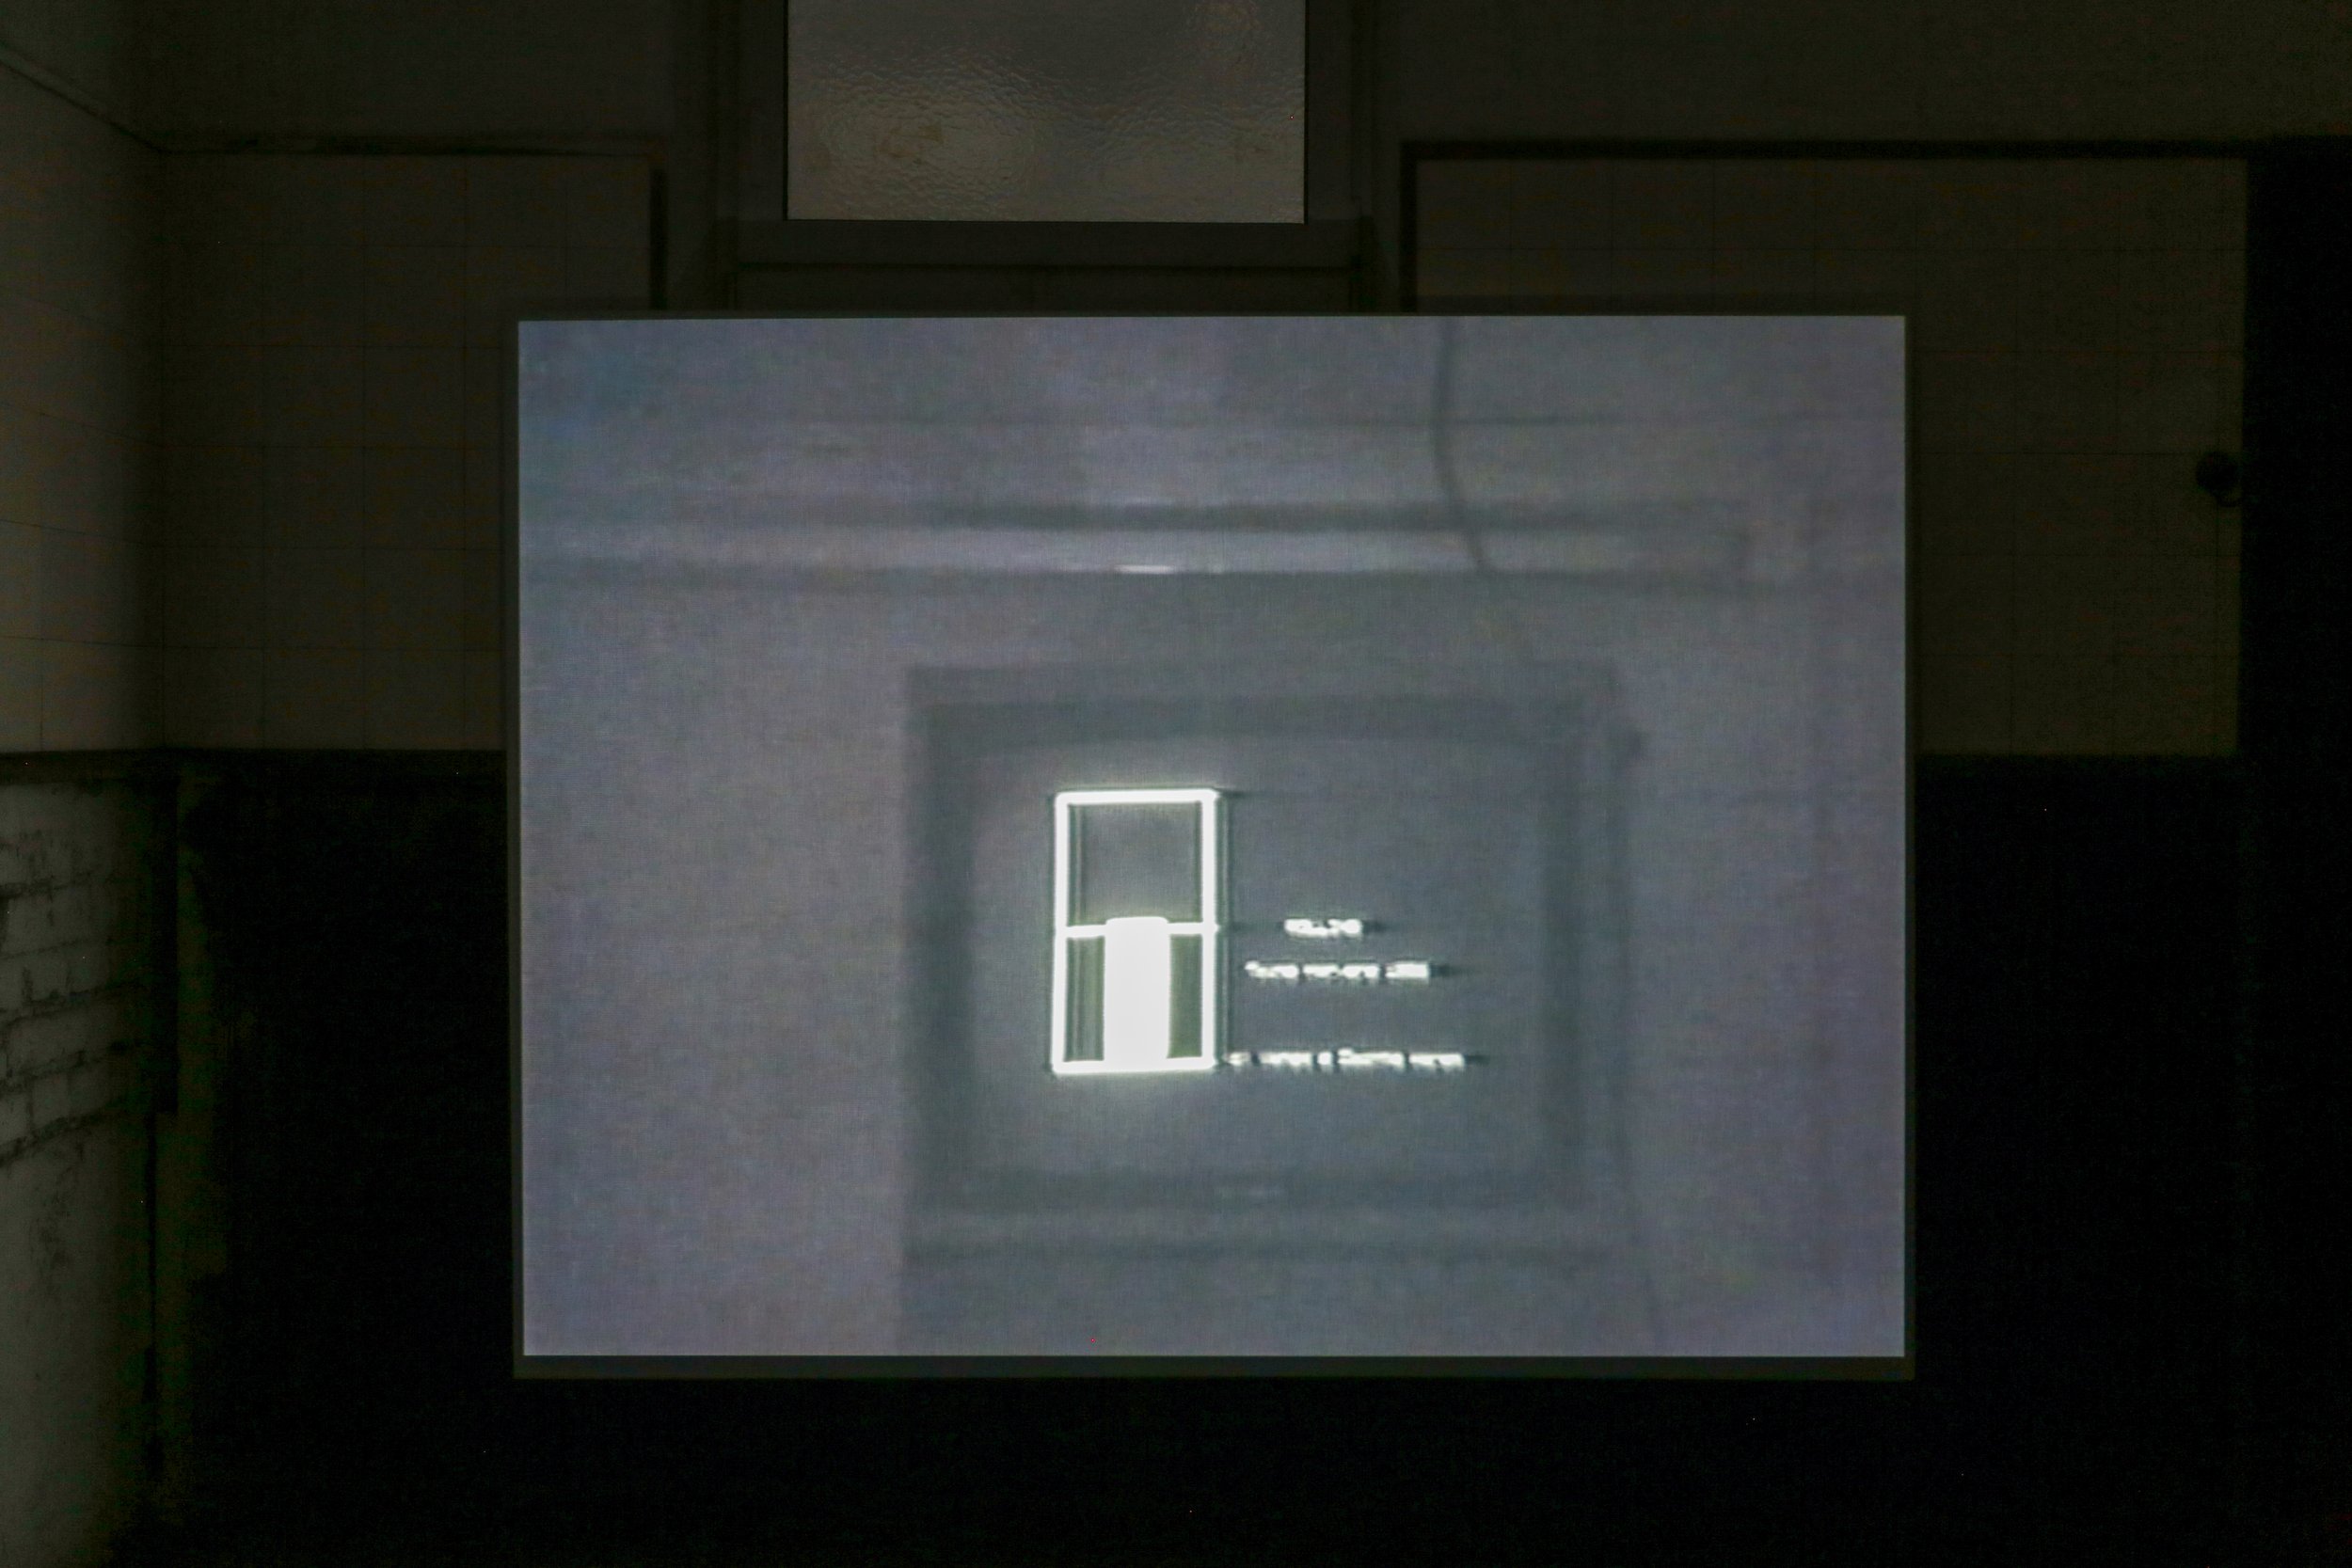   fig12 installation view Toine Horvers, Rolling, 1986 , 00:15:53., In collections: De Appel, LIMA  